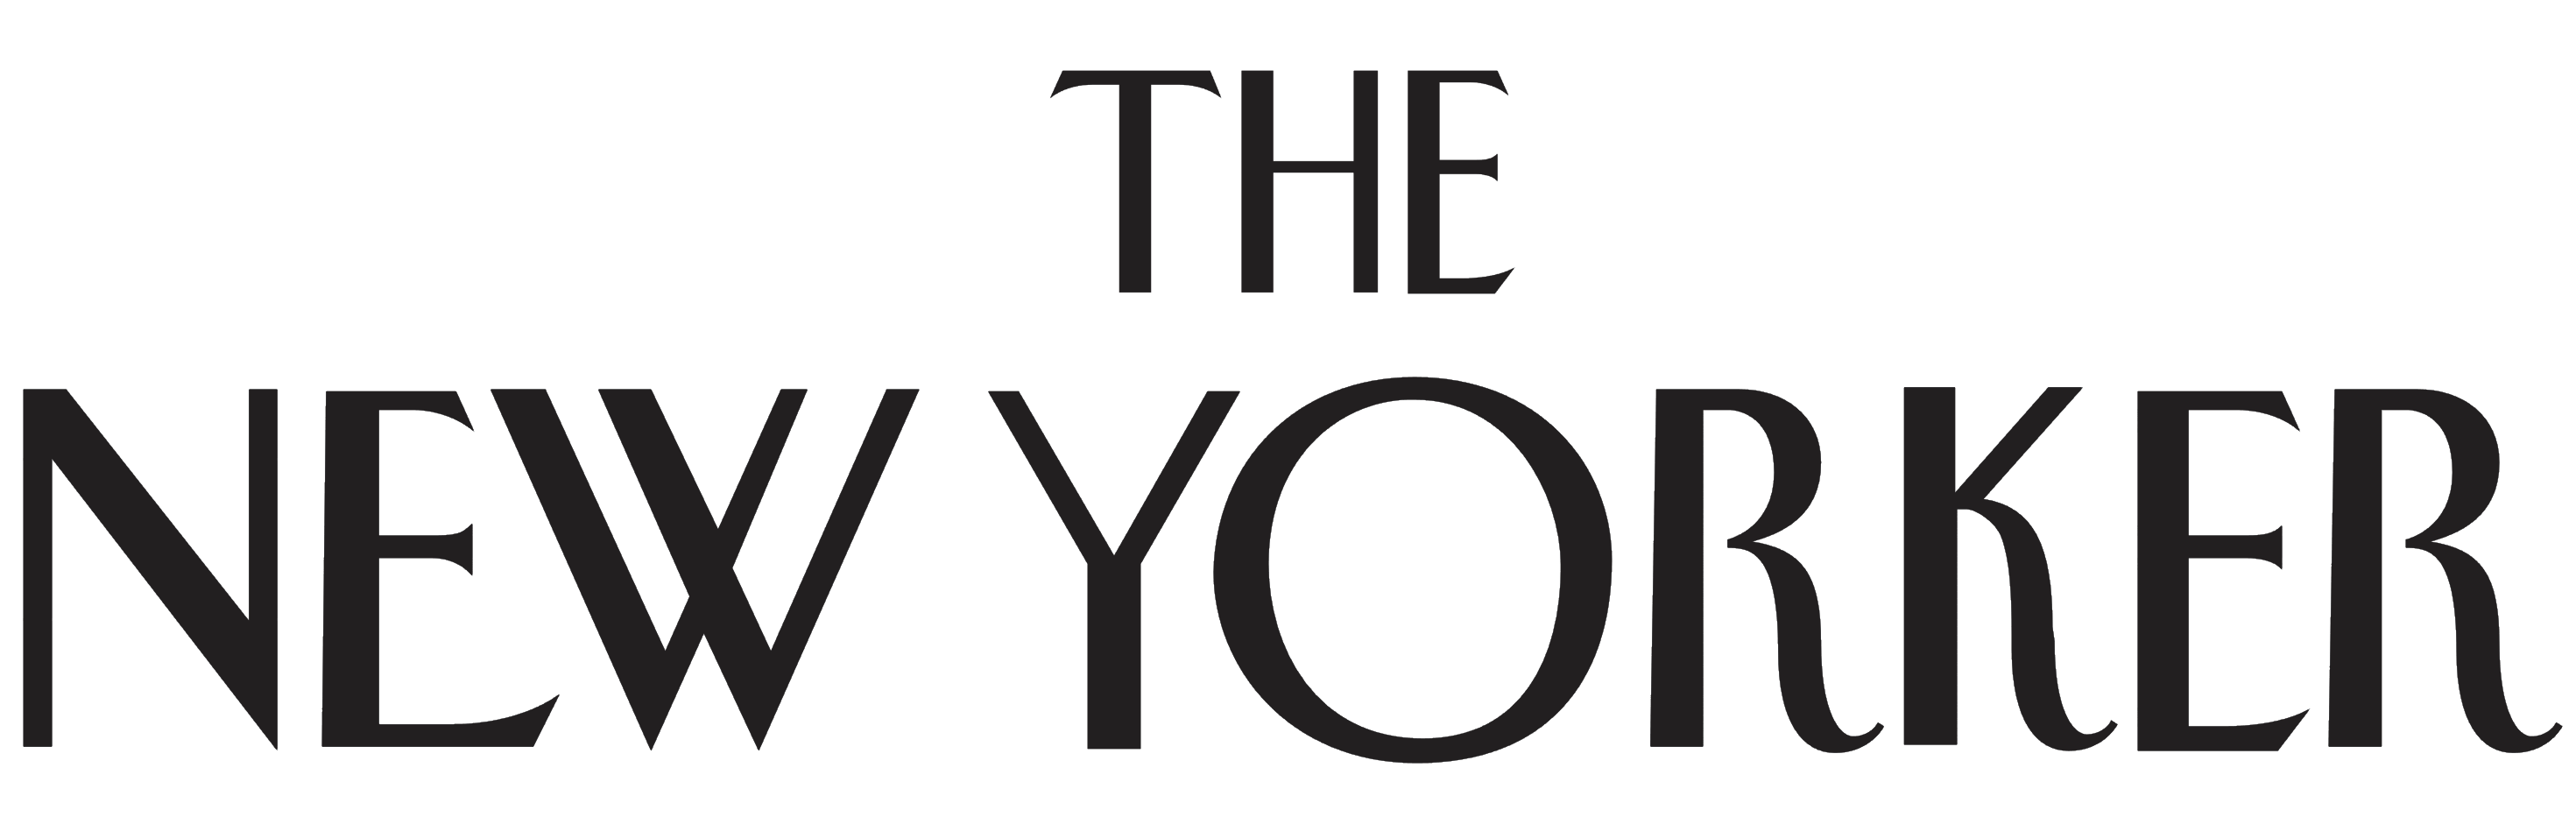 The New Yorker - Newyorker, Transparent background PNG HD thumbnail